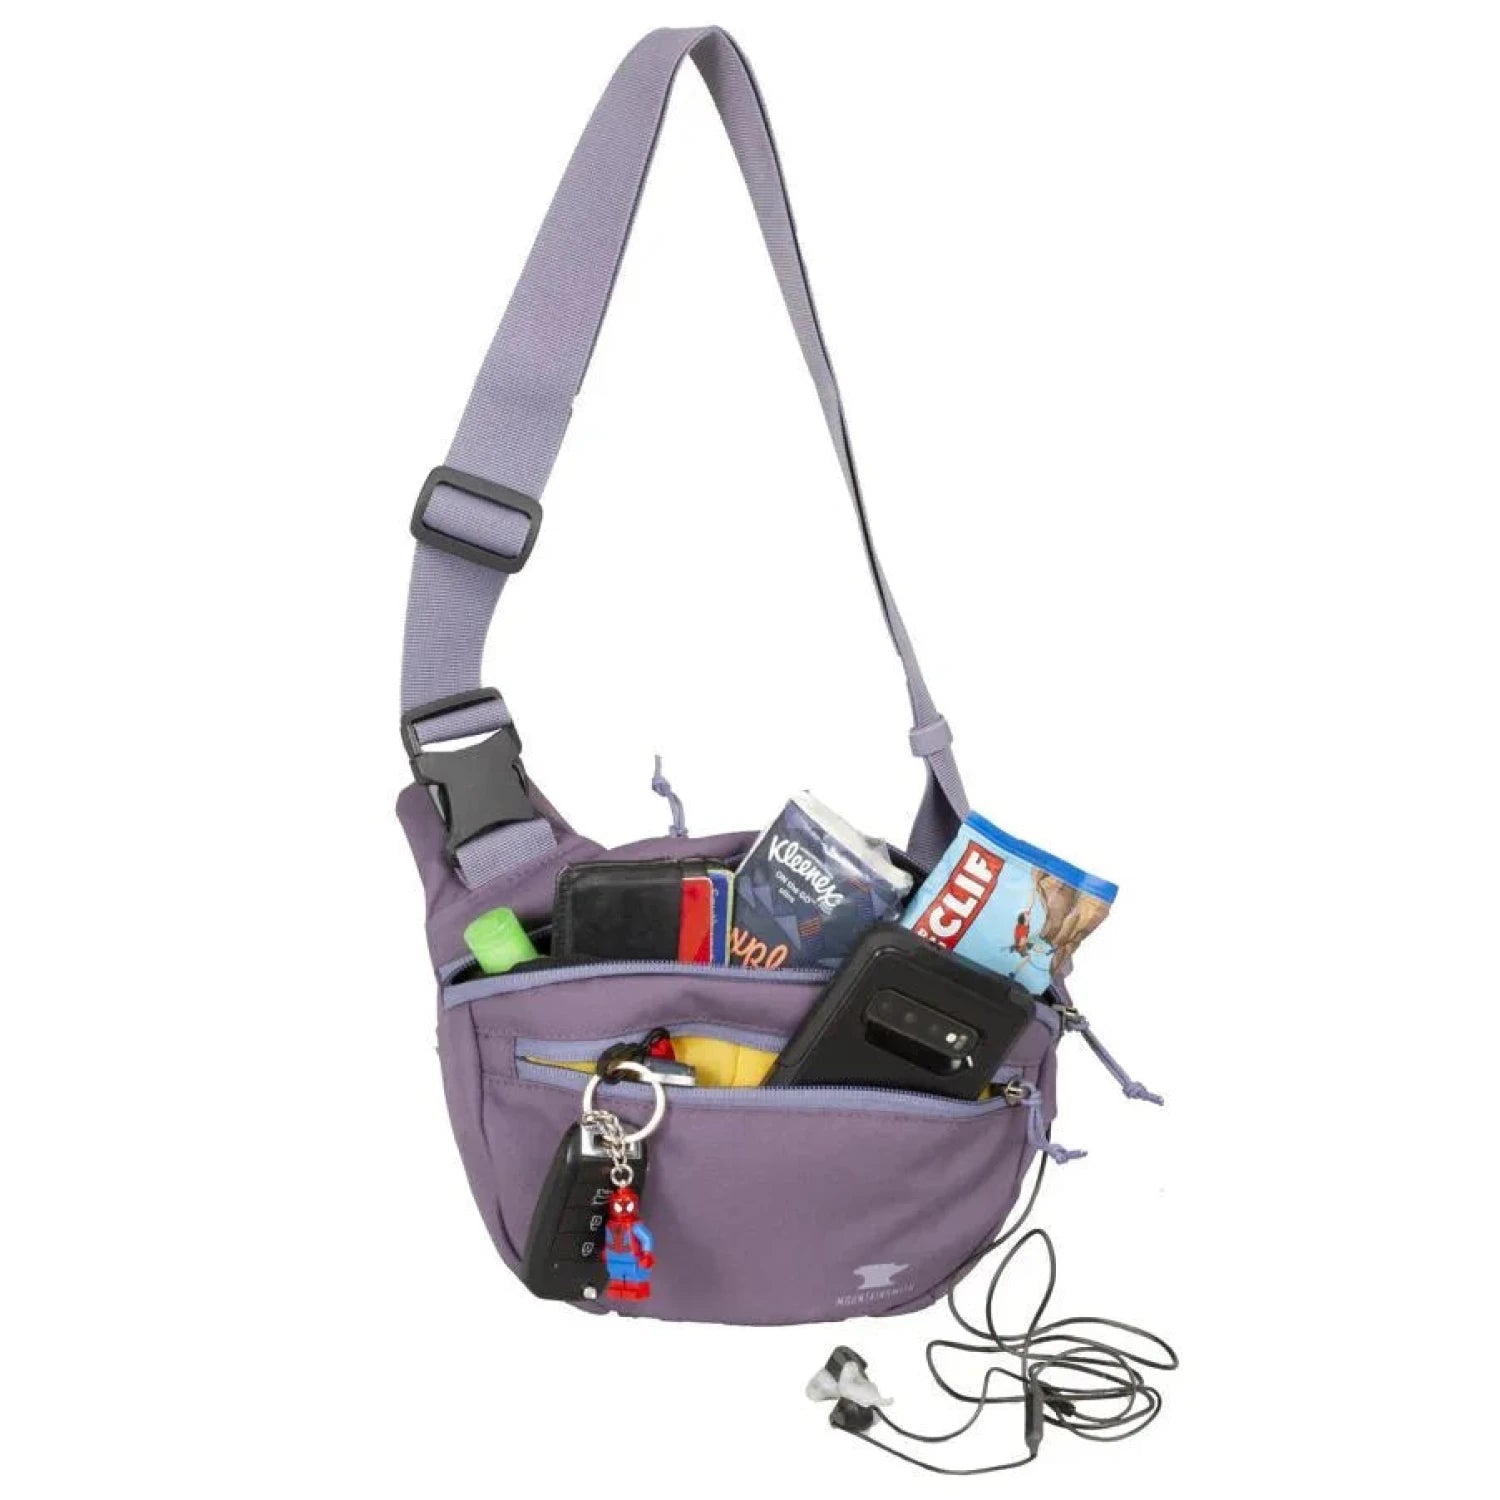 Mountainsmith Knockabout shown in the Black Plum color option, shown packed.